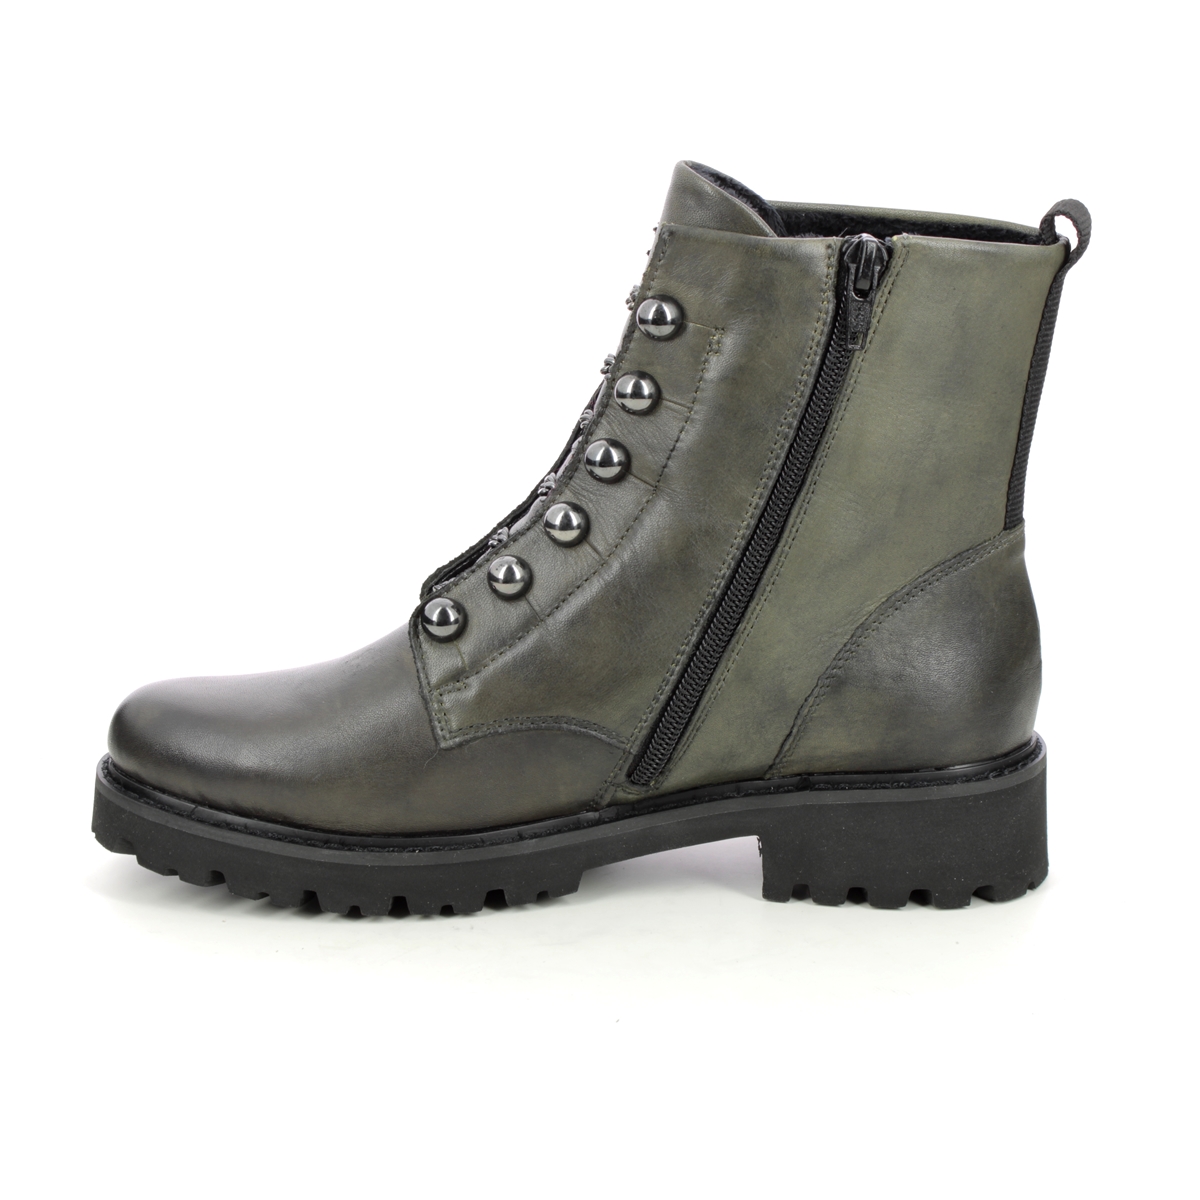 Remonte D8670-52 Docland Olive leather Womens Biker Boots